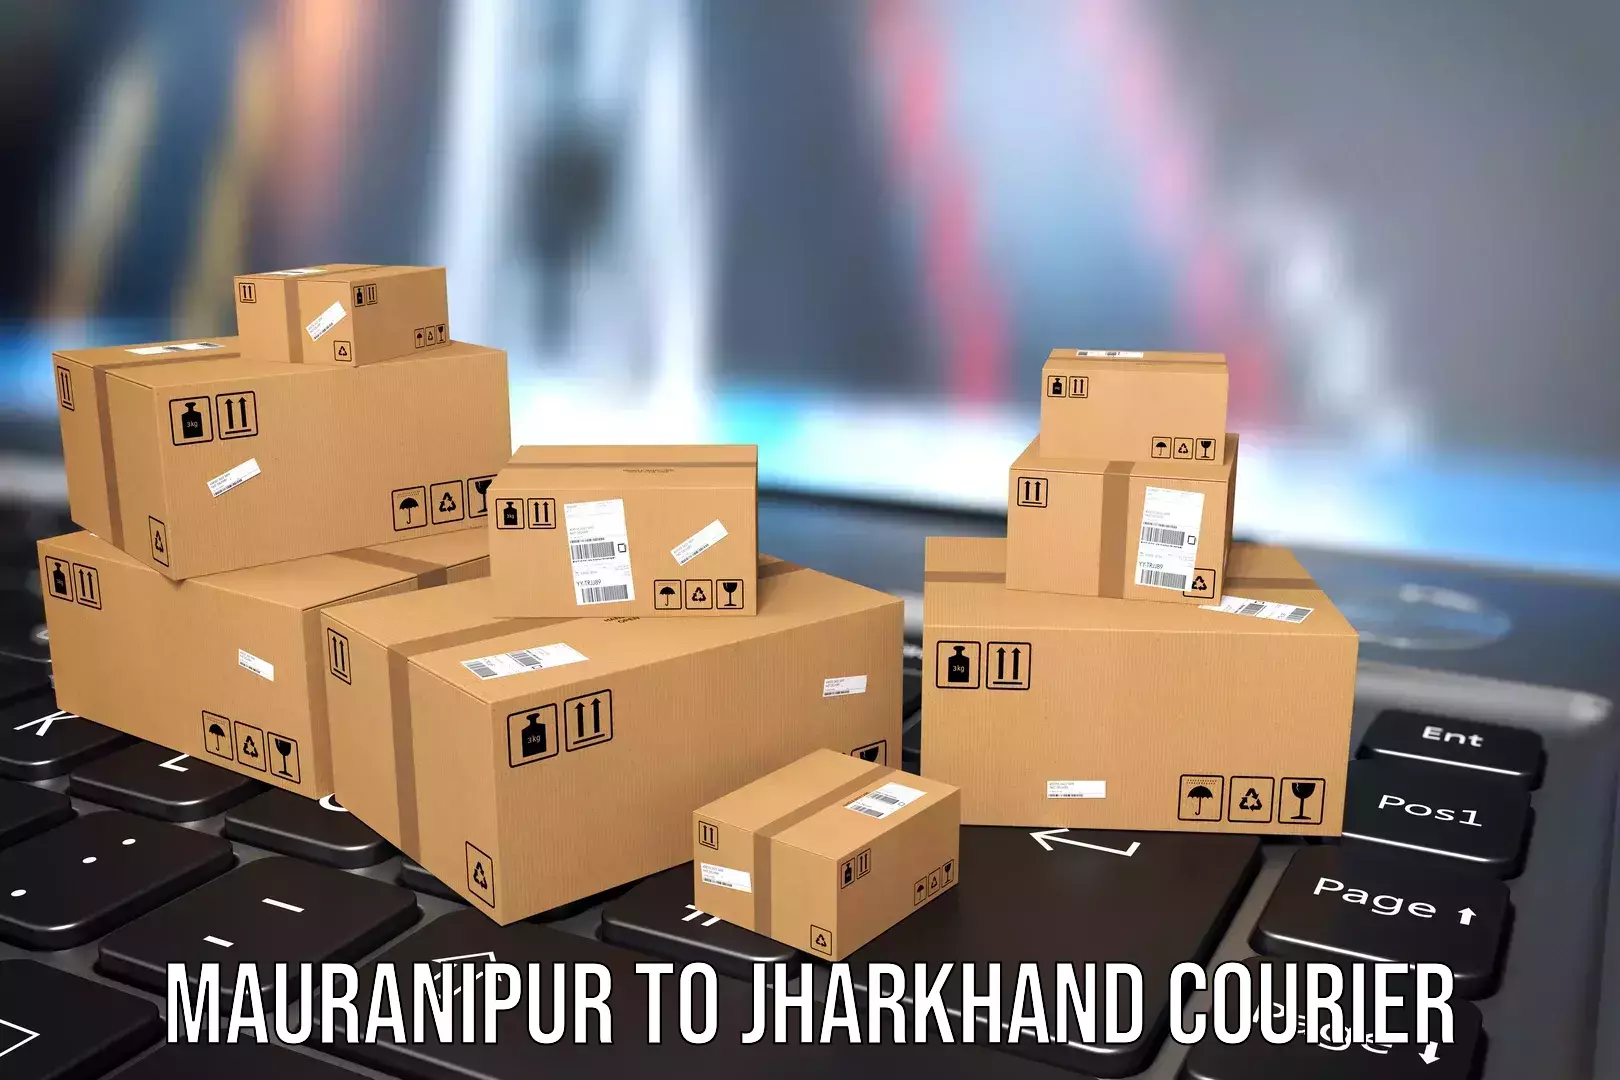 Luggage delivery system Mauranipur to Jharkhand